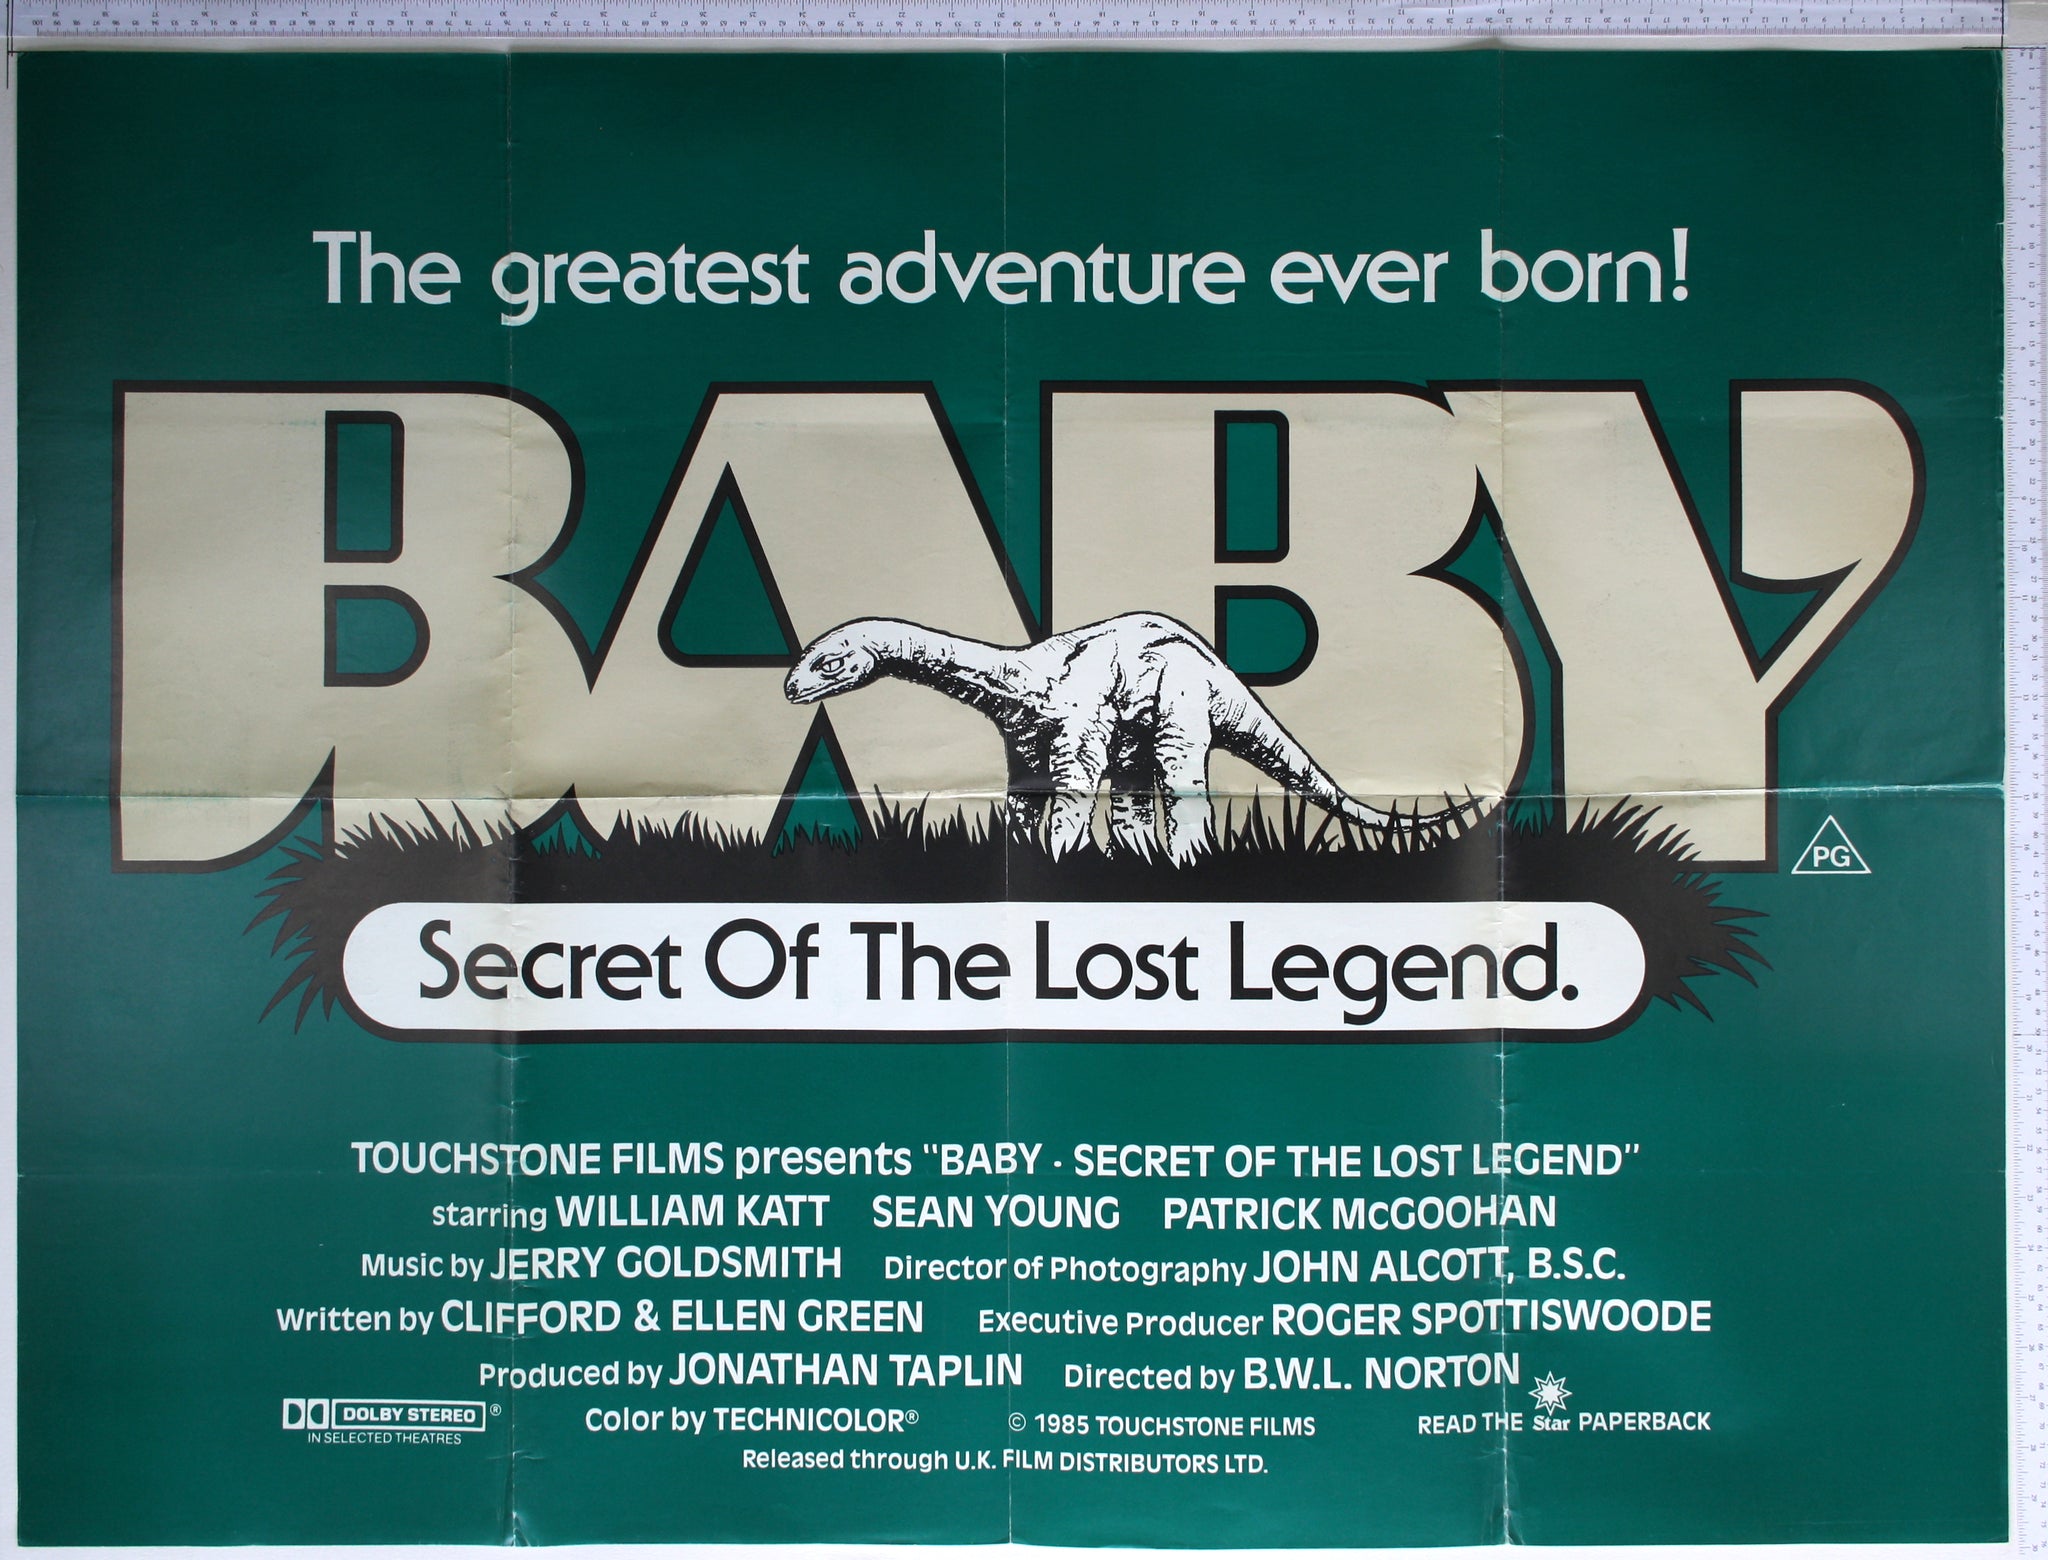 Graphic poster of the title behind artwork of the baby dinosaur on dark grass, all against dark green background